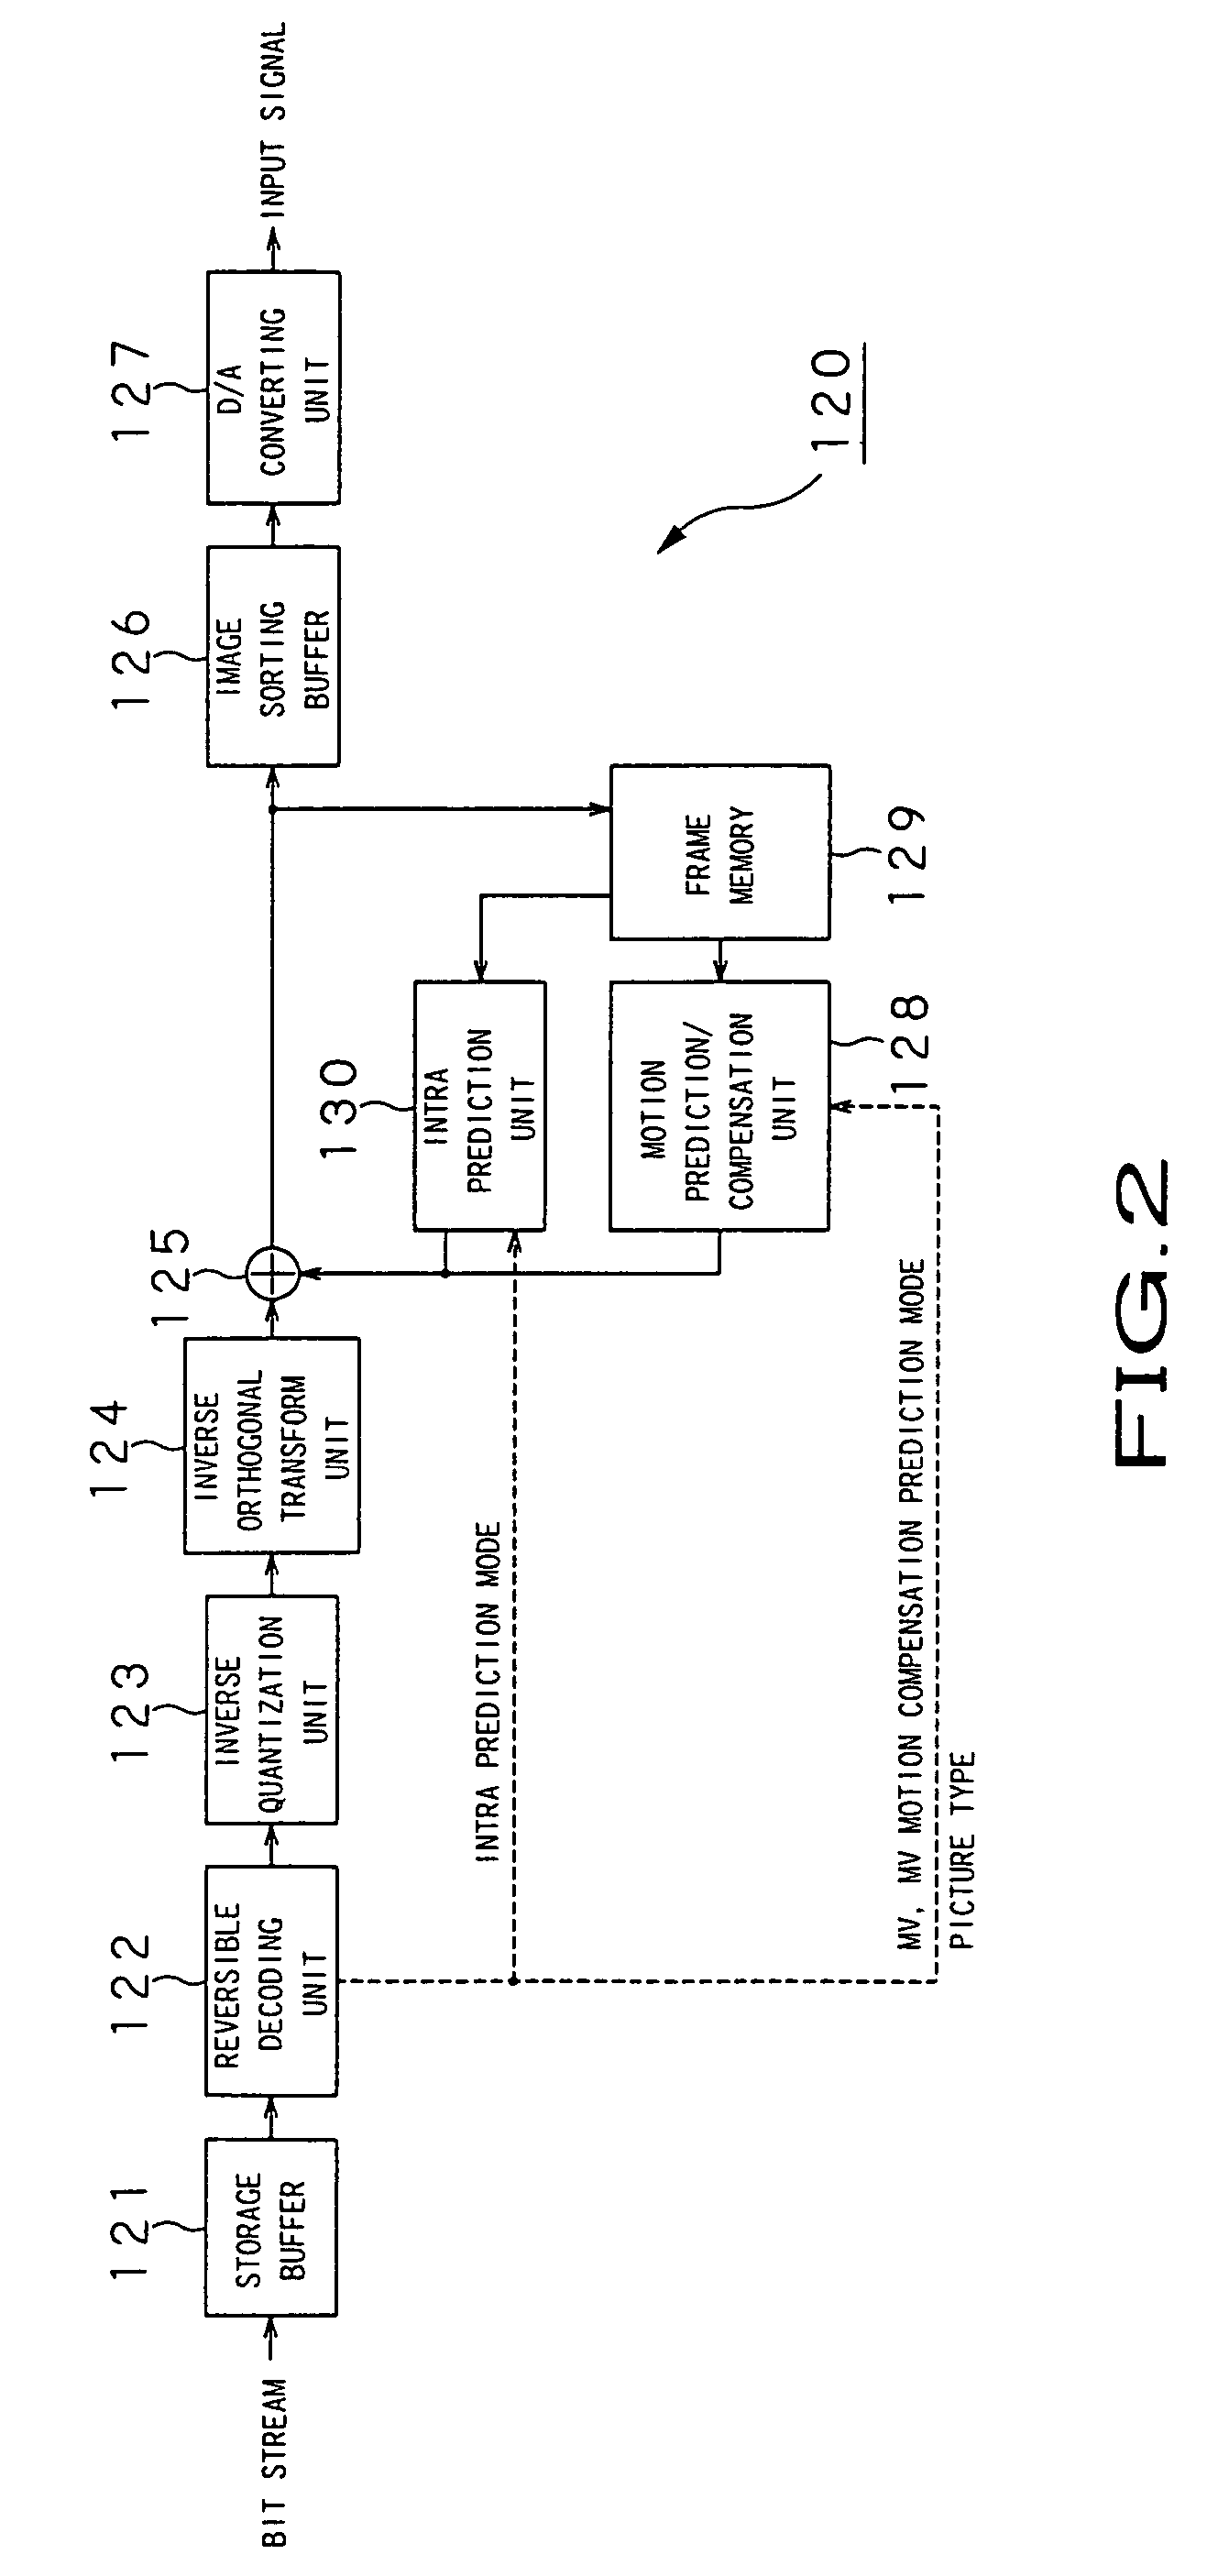 Image encoding apparatus and method for handling intra-image predictive encoding with various color spaces and color signal resolutions